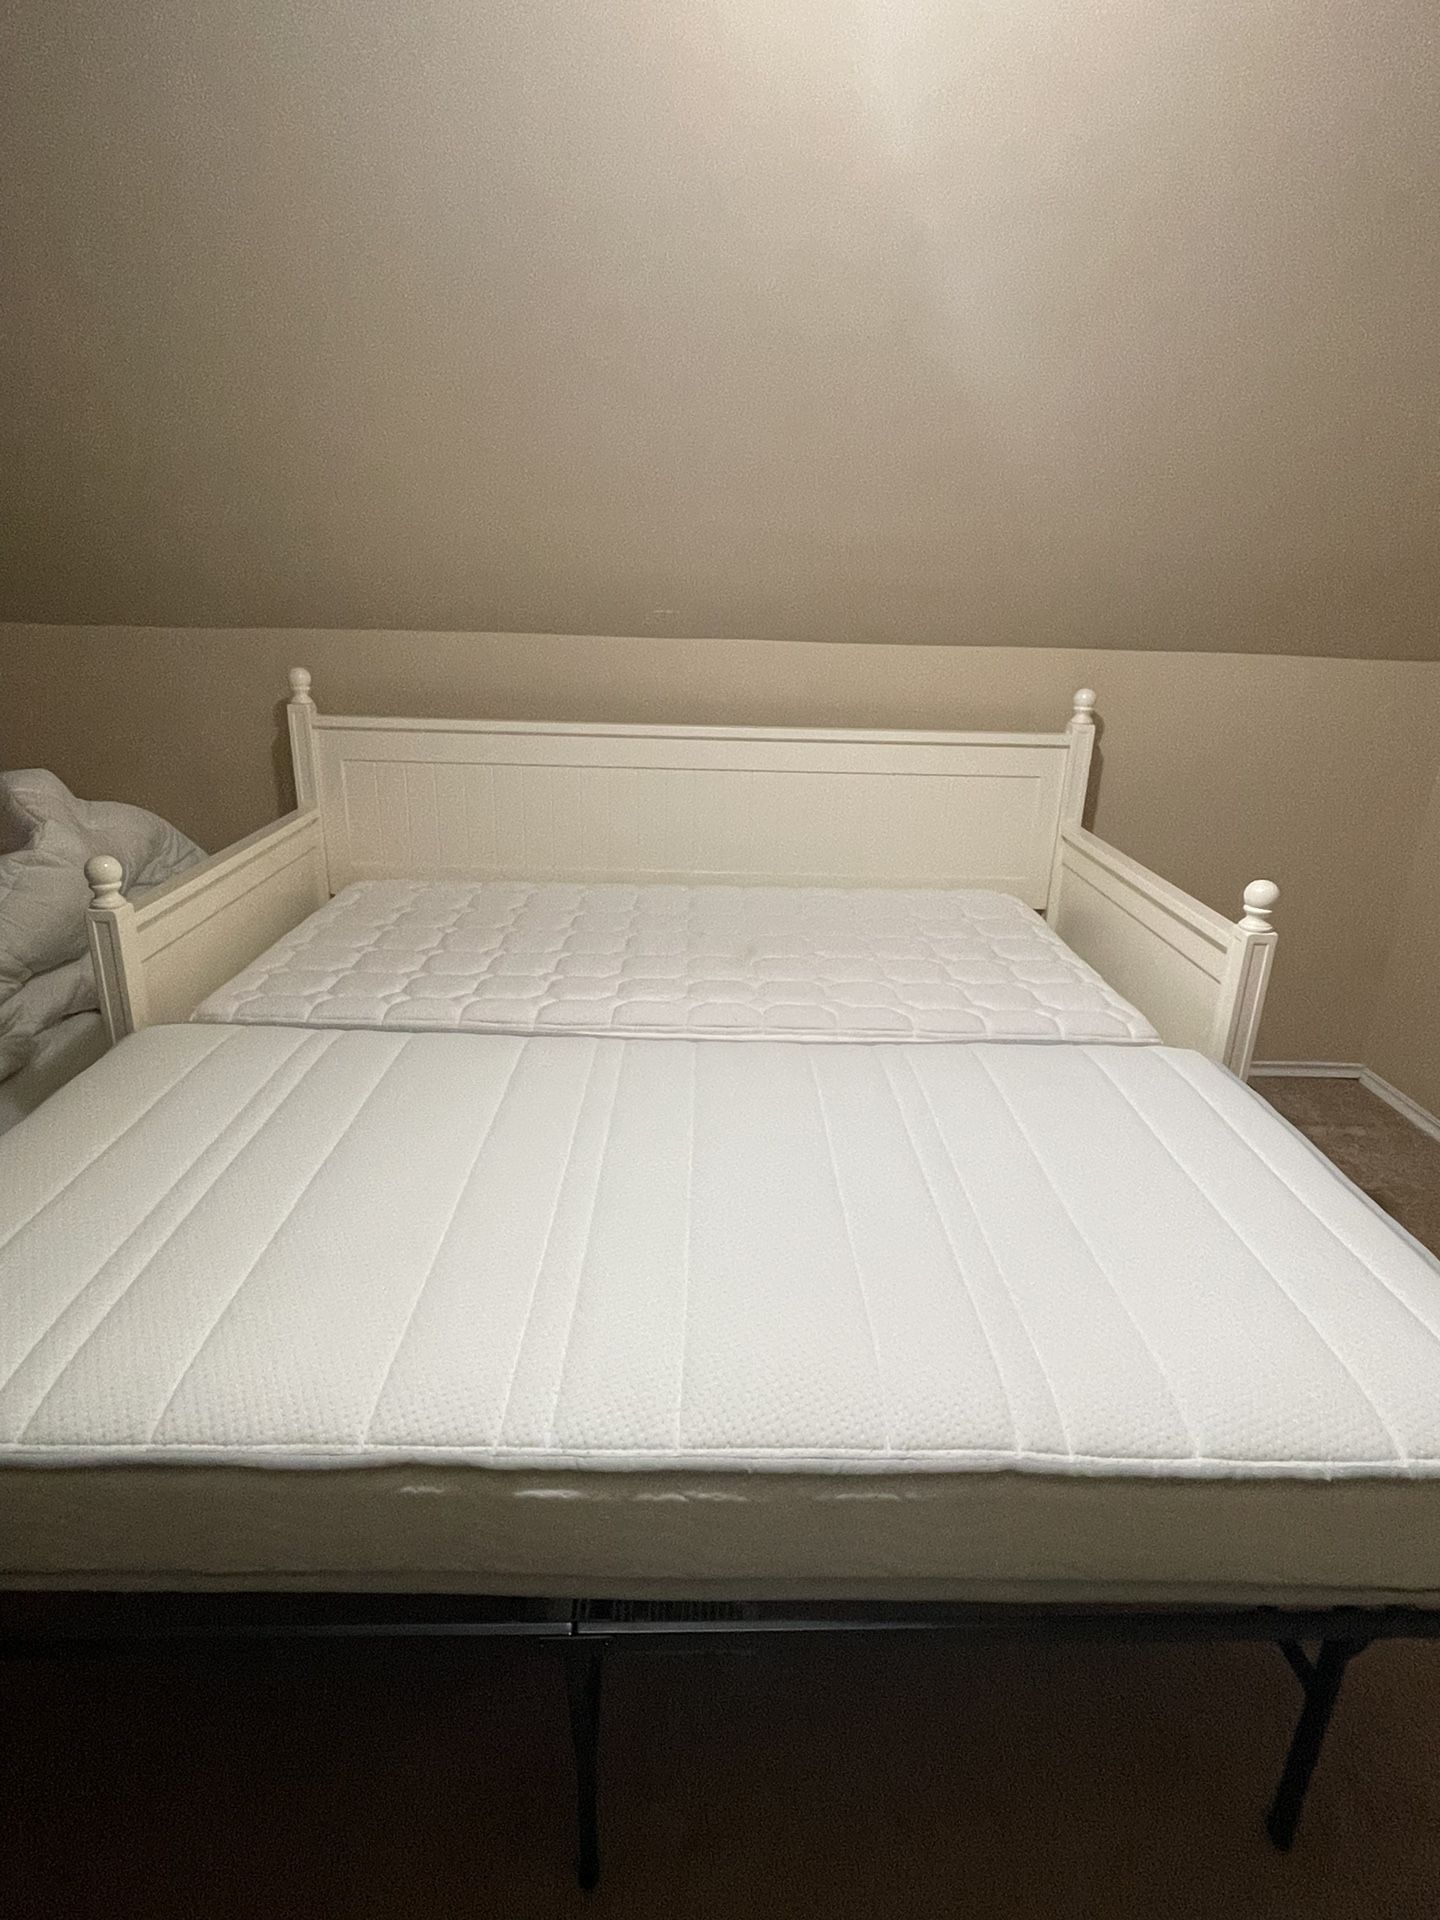 King Bed Set (2 Twin Beds, Daybed, And Steel Frame)